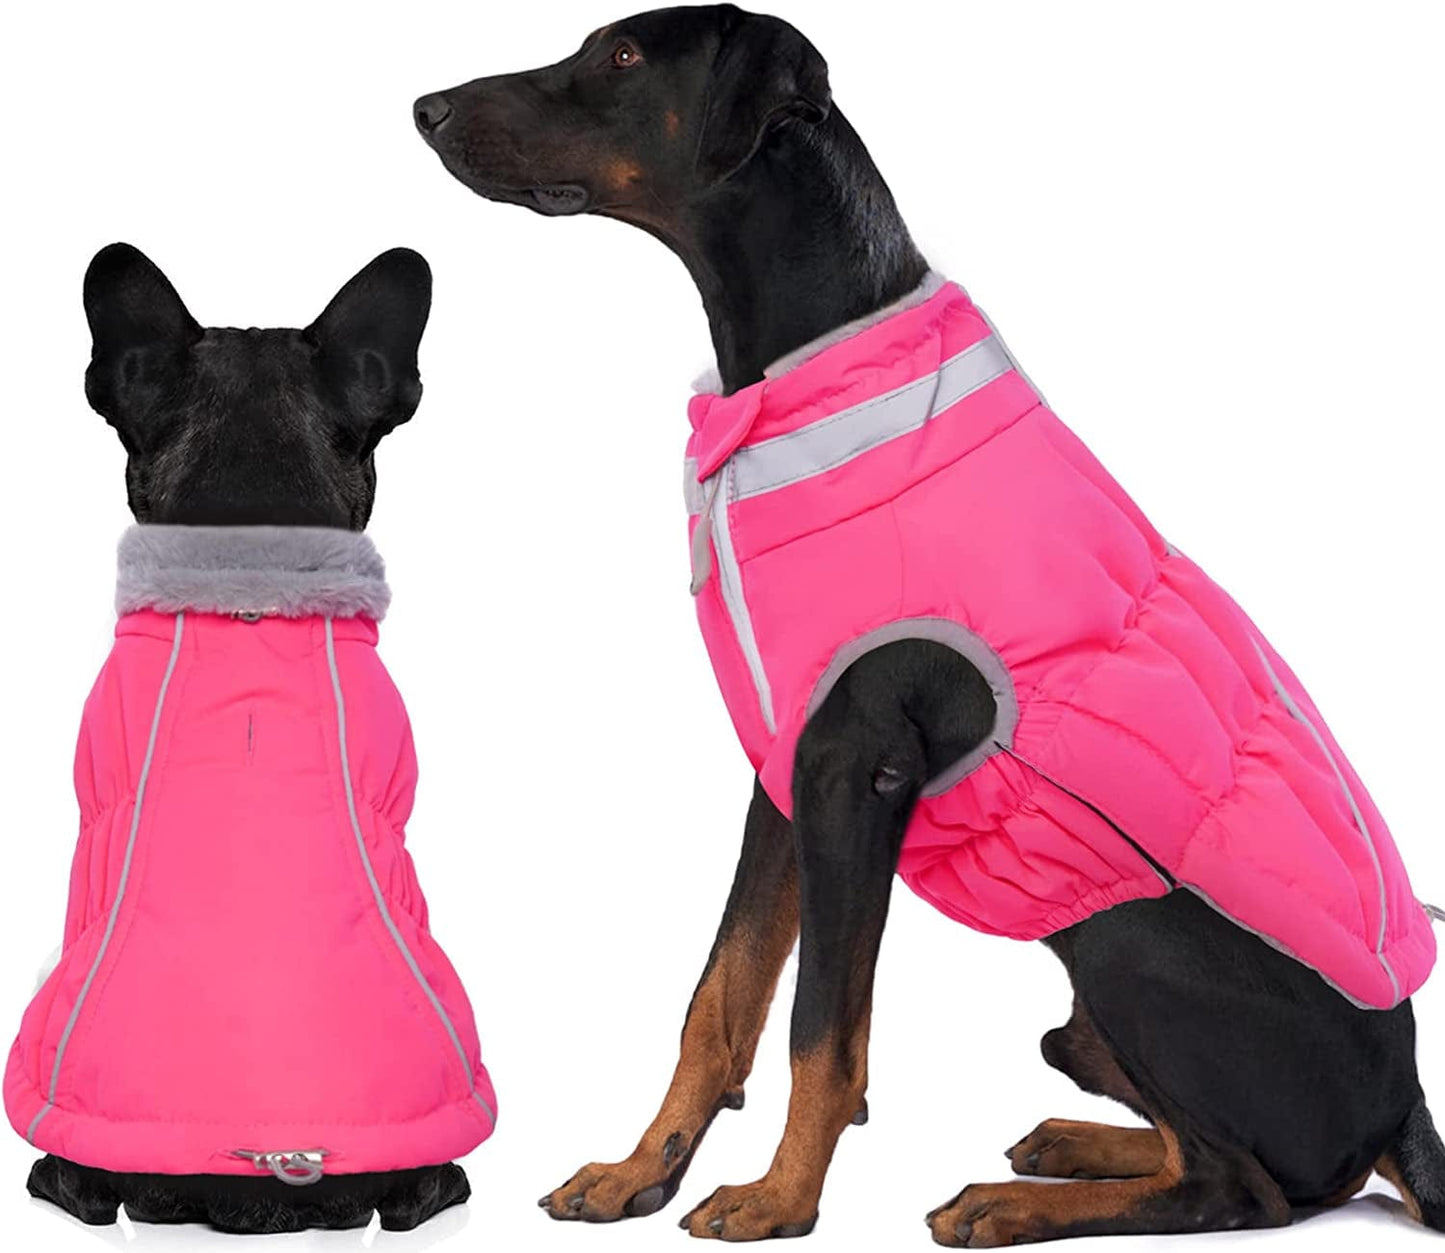 Fleece Jumper for Whippets - Darks - Redhound For Dogs